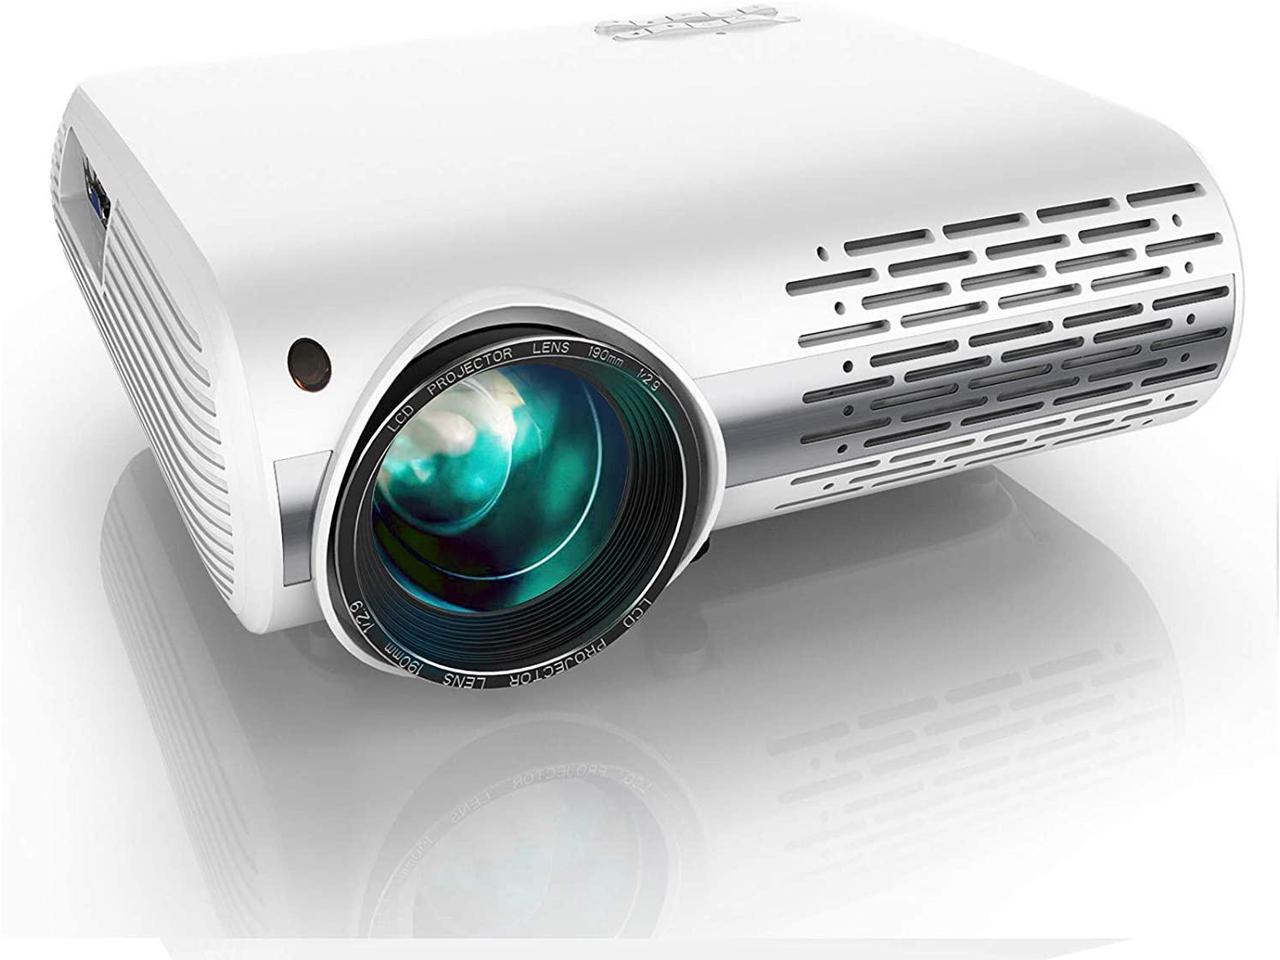 Native 1080P Projector with Screen BIGASUO Mini Video Projector for Home Theater Compatible with iPhone/Smartphone/Laptop/PC/PS4—50,000 Hours LED Lamp Life 8500L Outdoor Movie Projector Bluetooth 